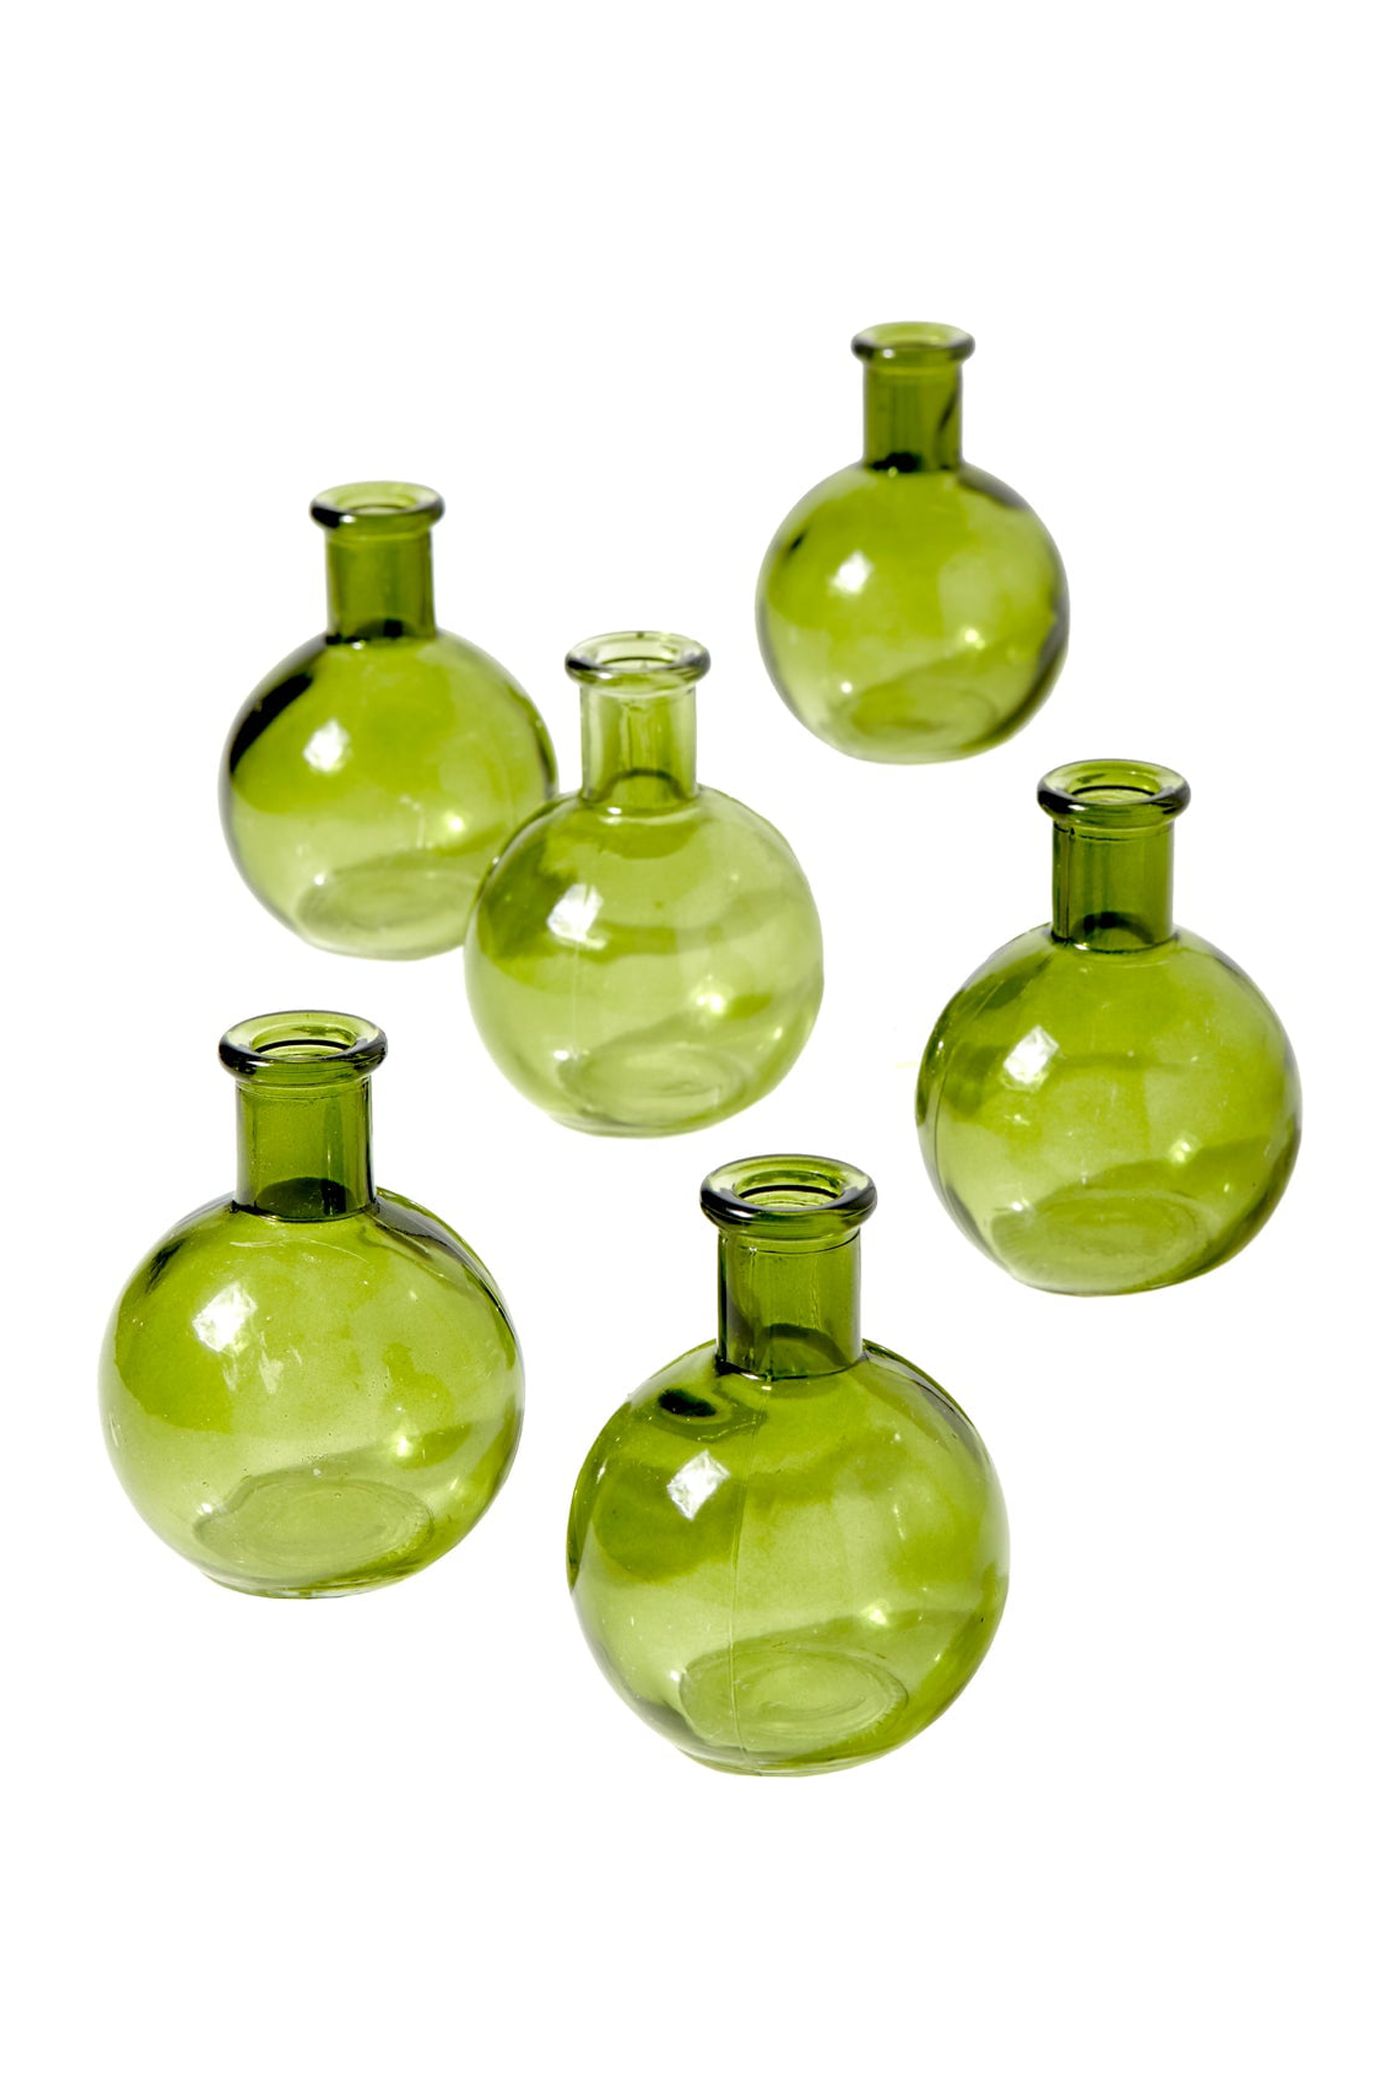 Serene Spaces Living Set of 6 Small Green Ball Bud Vases, Measures 4" Tall - image 1 of 4